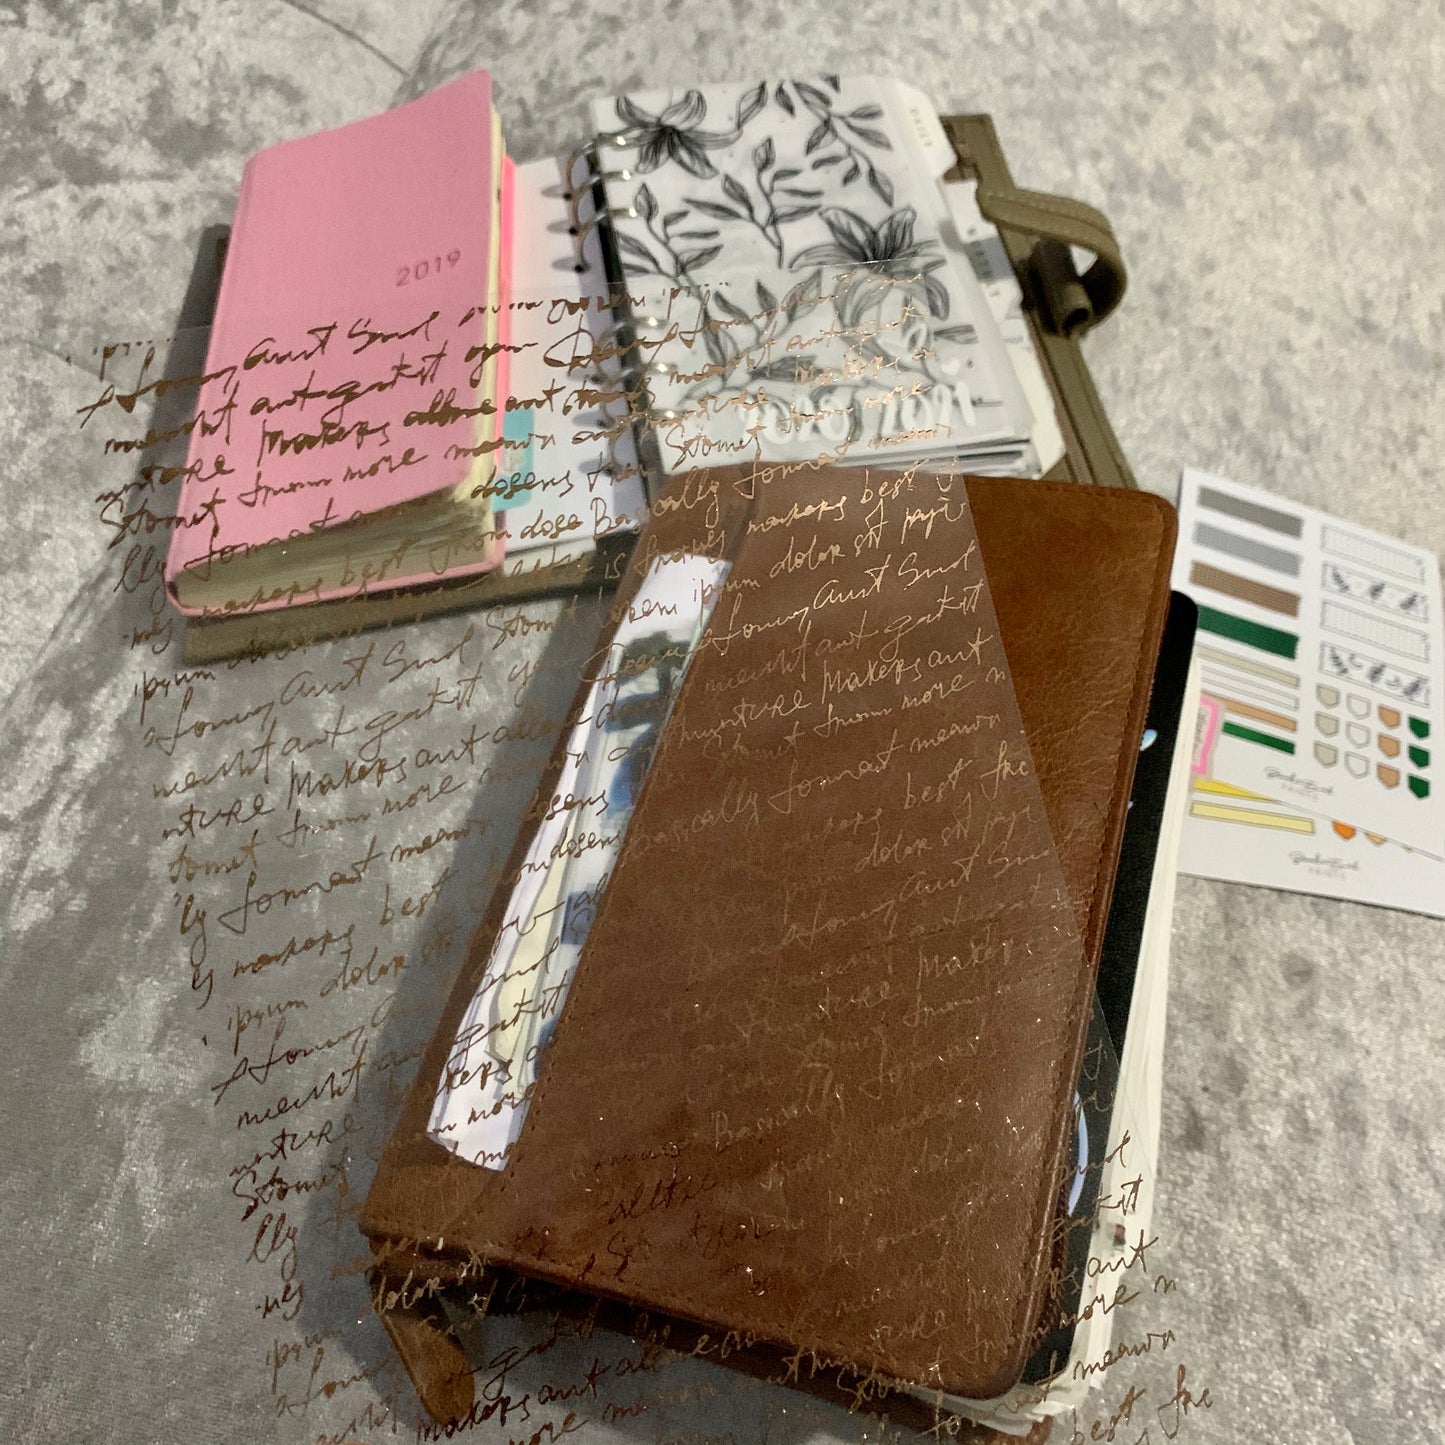 Acetate Dashboard - Foiled Rose Gold Vintage Script for Planners, Notebooks and Journals